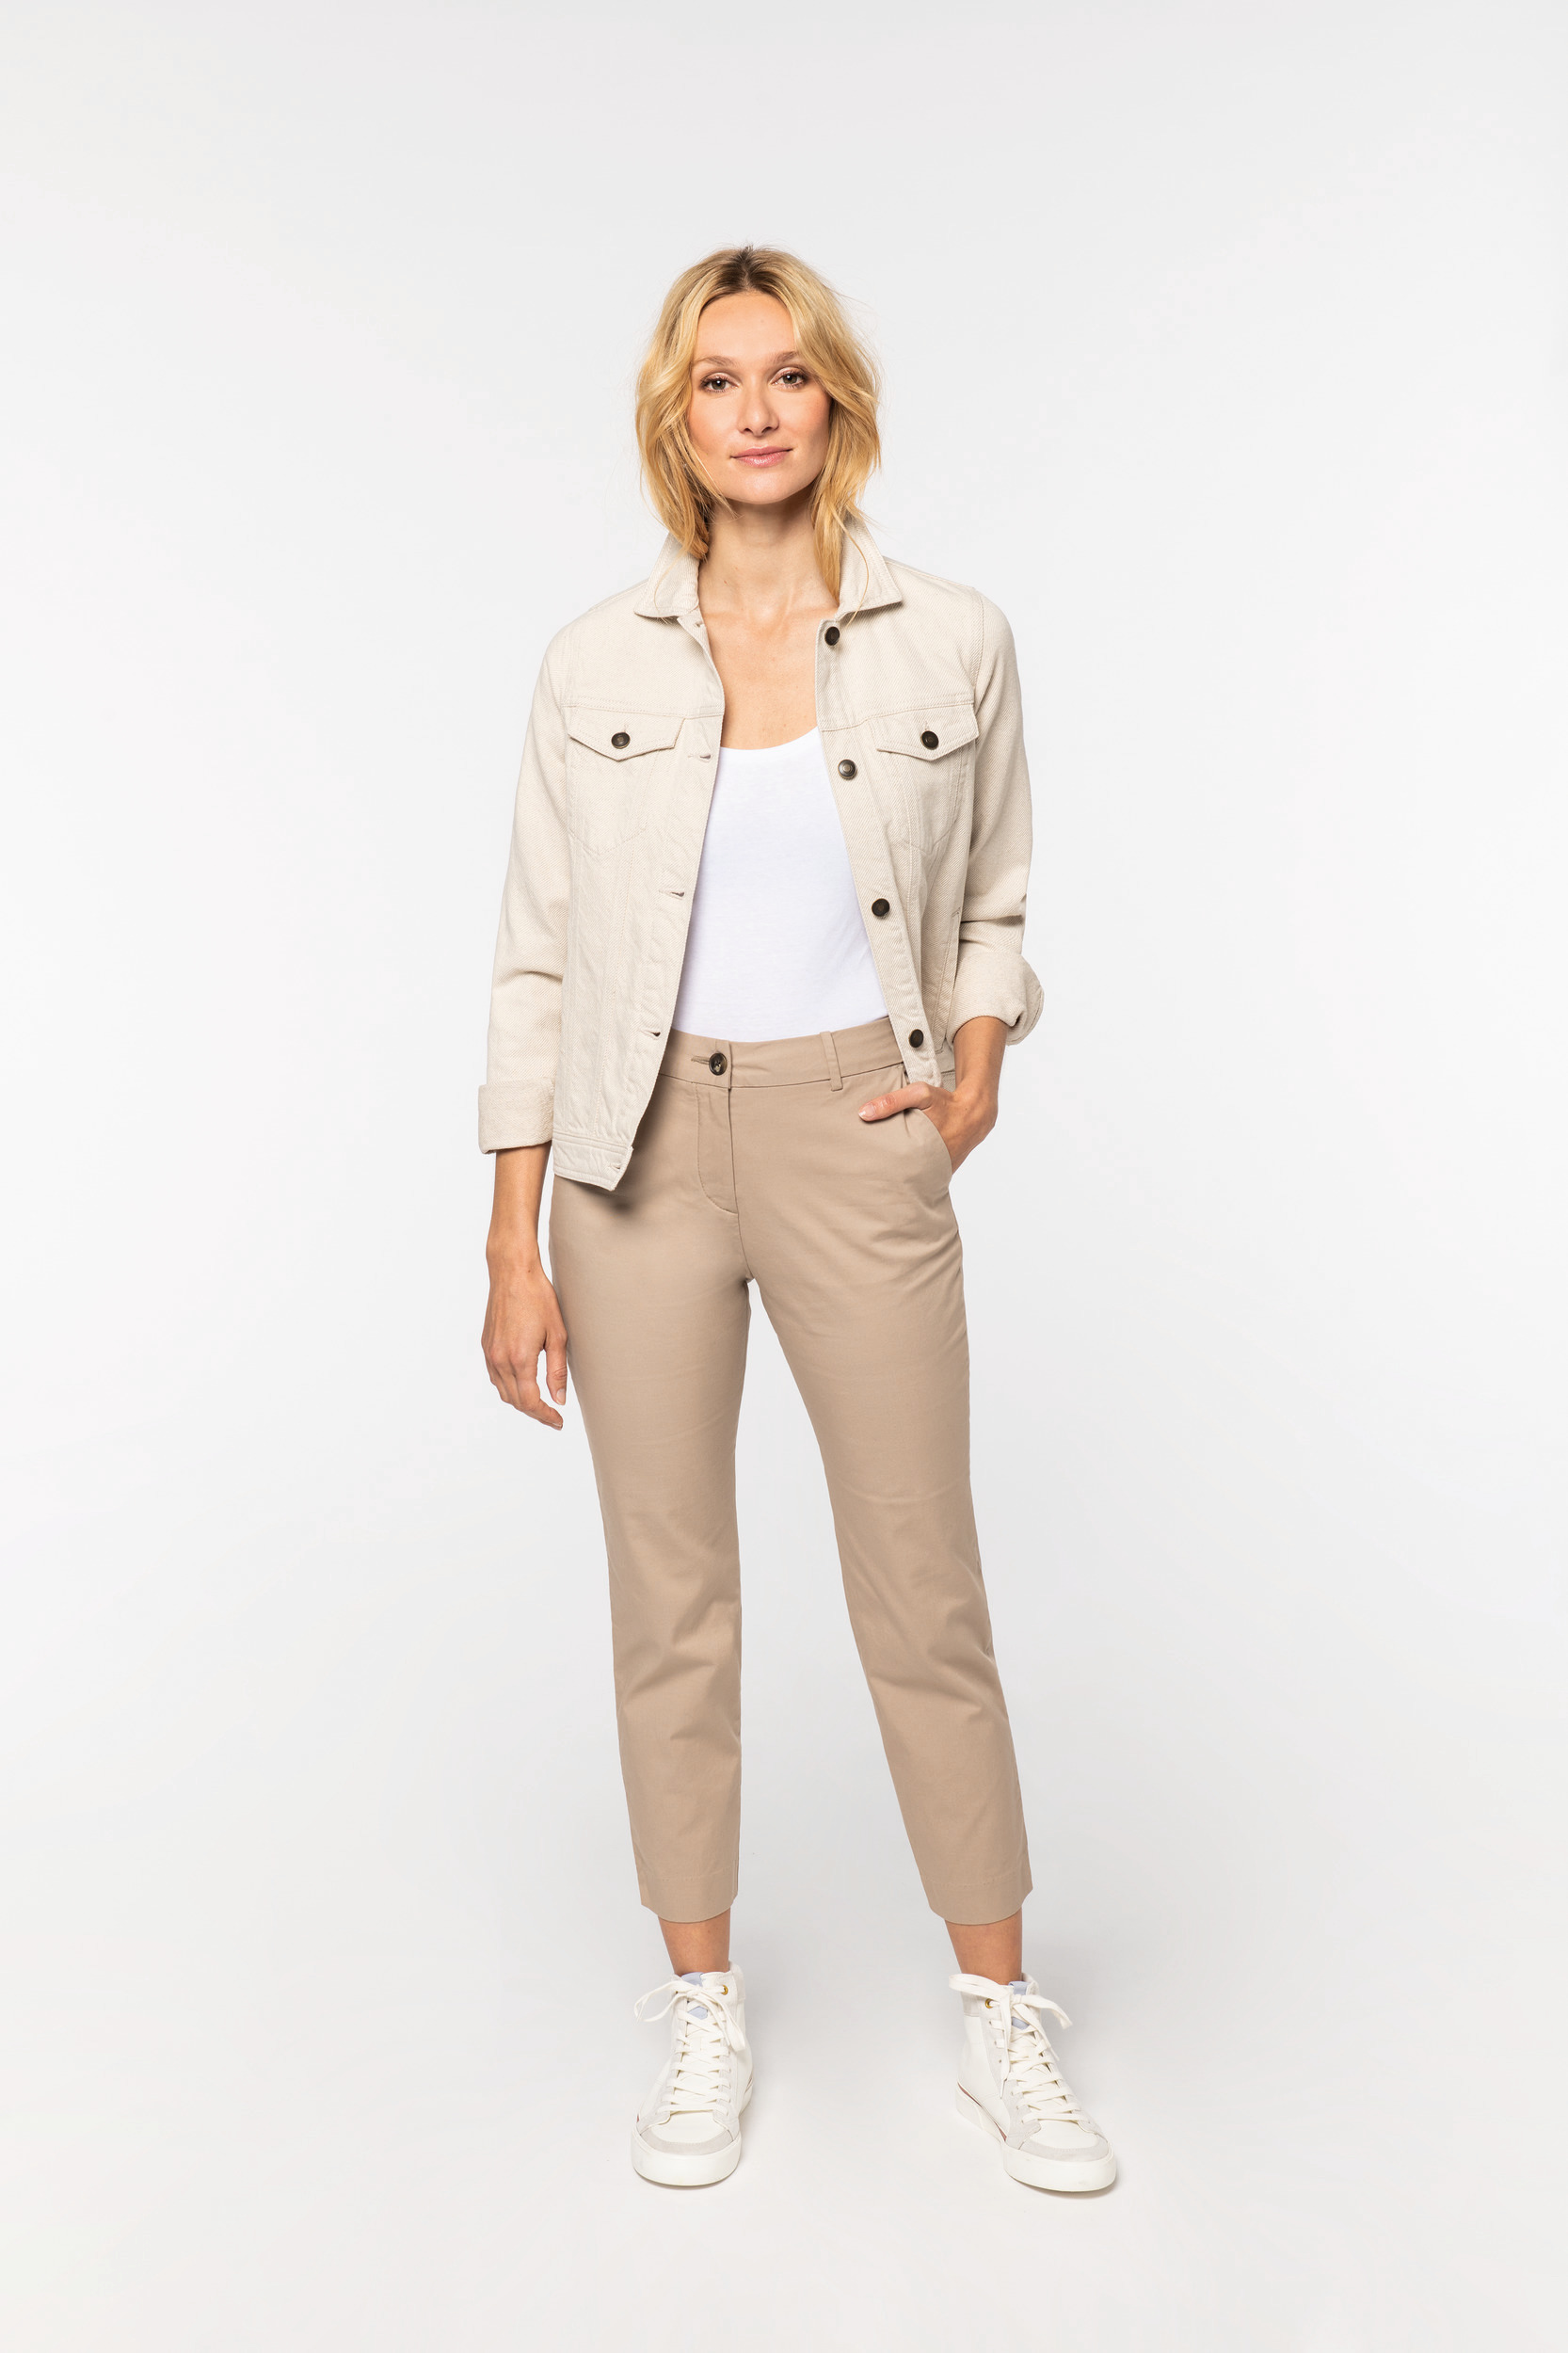 Buy Sellingsea Women's Stylish Pintuck Beige Cotton Stretchable Pant at